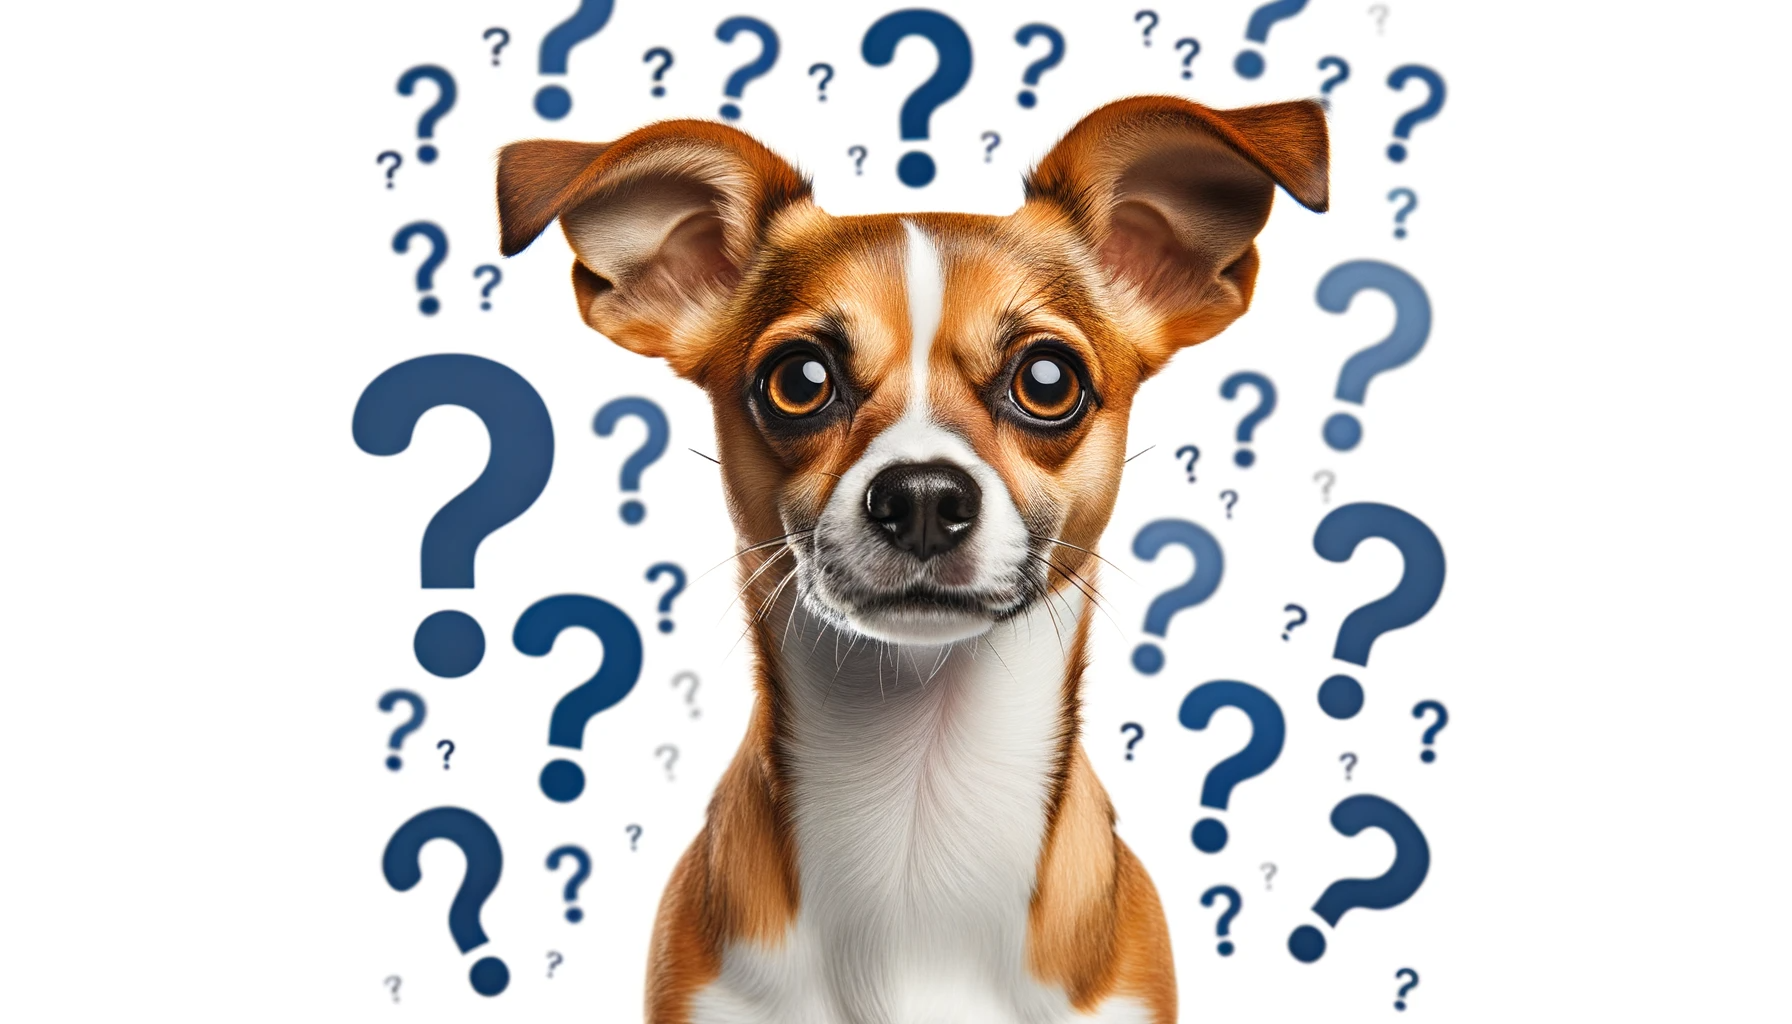 A Labrahuahua with a puzzled expression, surrounded by question marks, prompting the question of whether this breed is the right fit for you